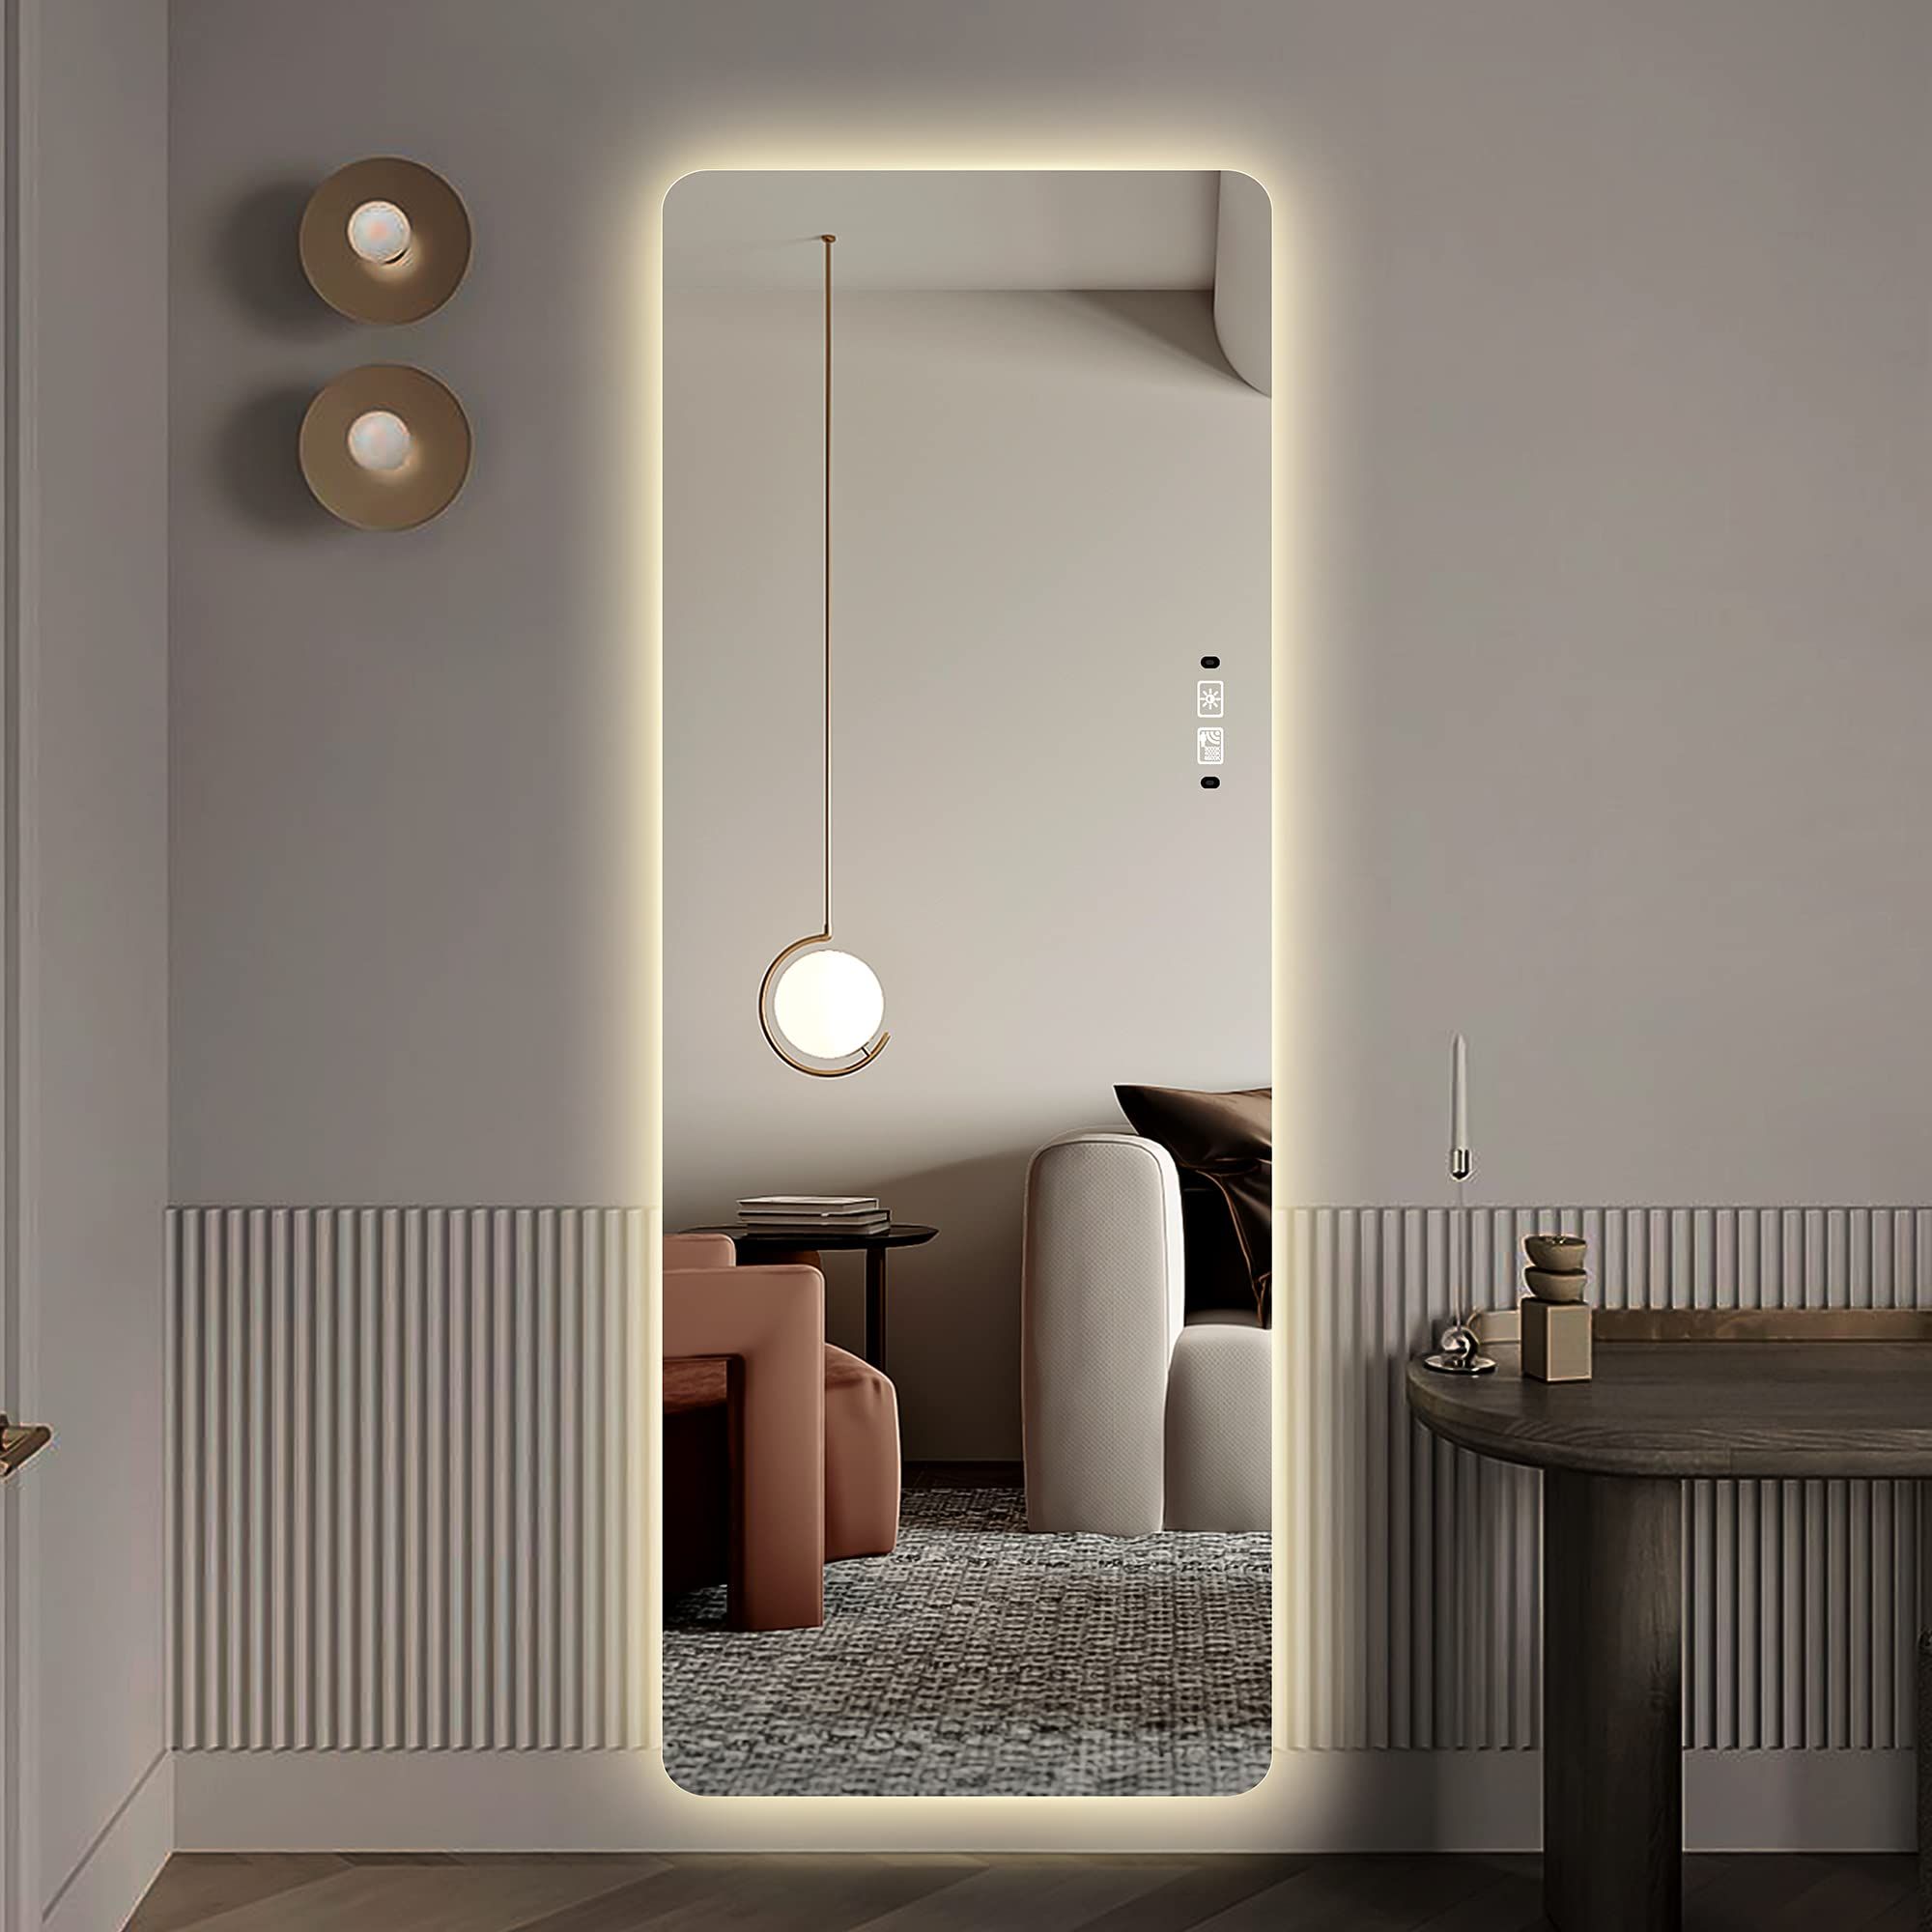 Mirror With Lights: Enhancing Your Vanity with Illuminated Elegance